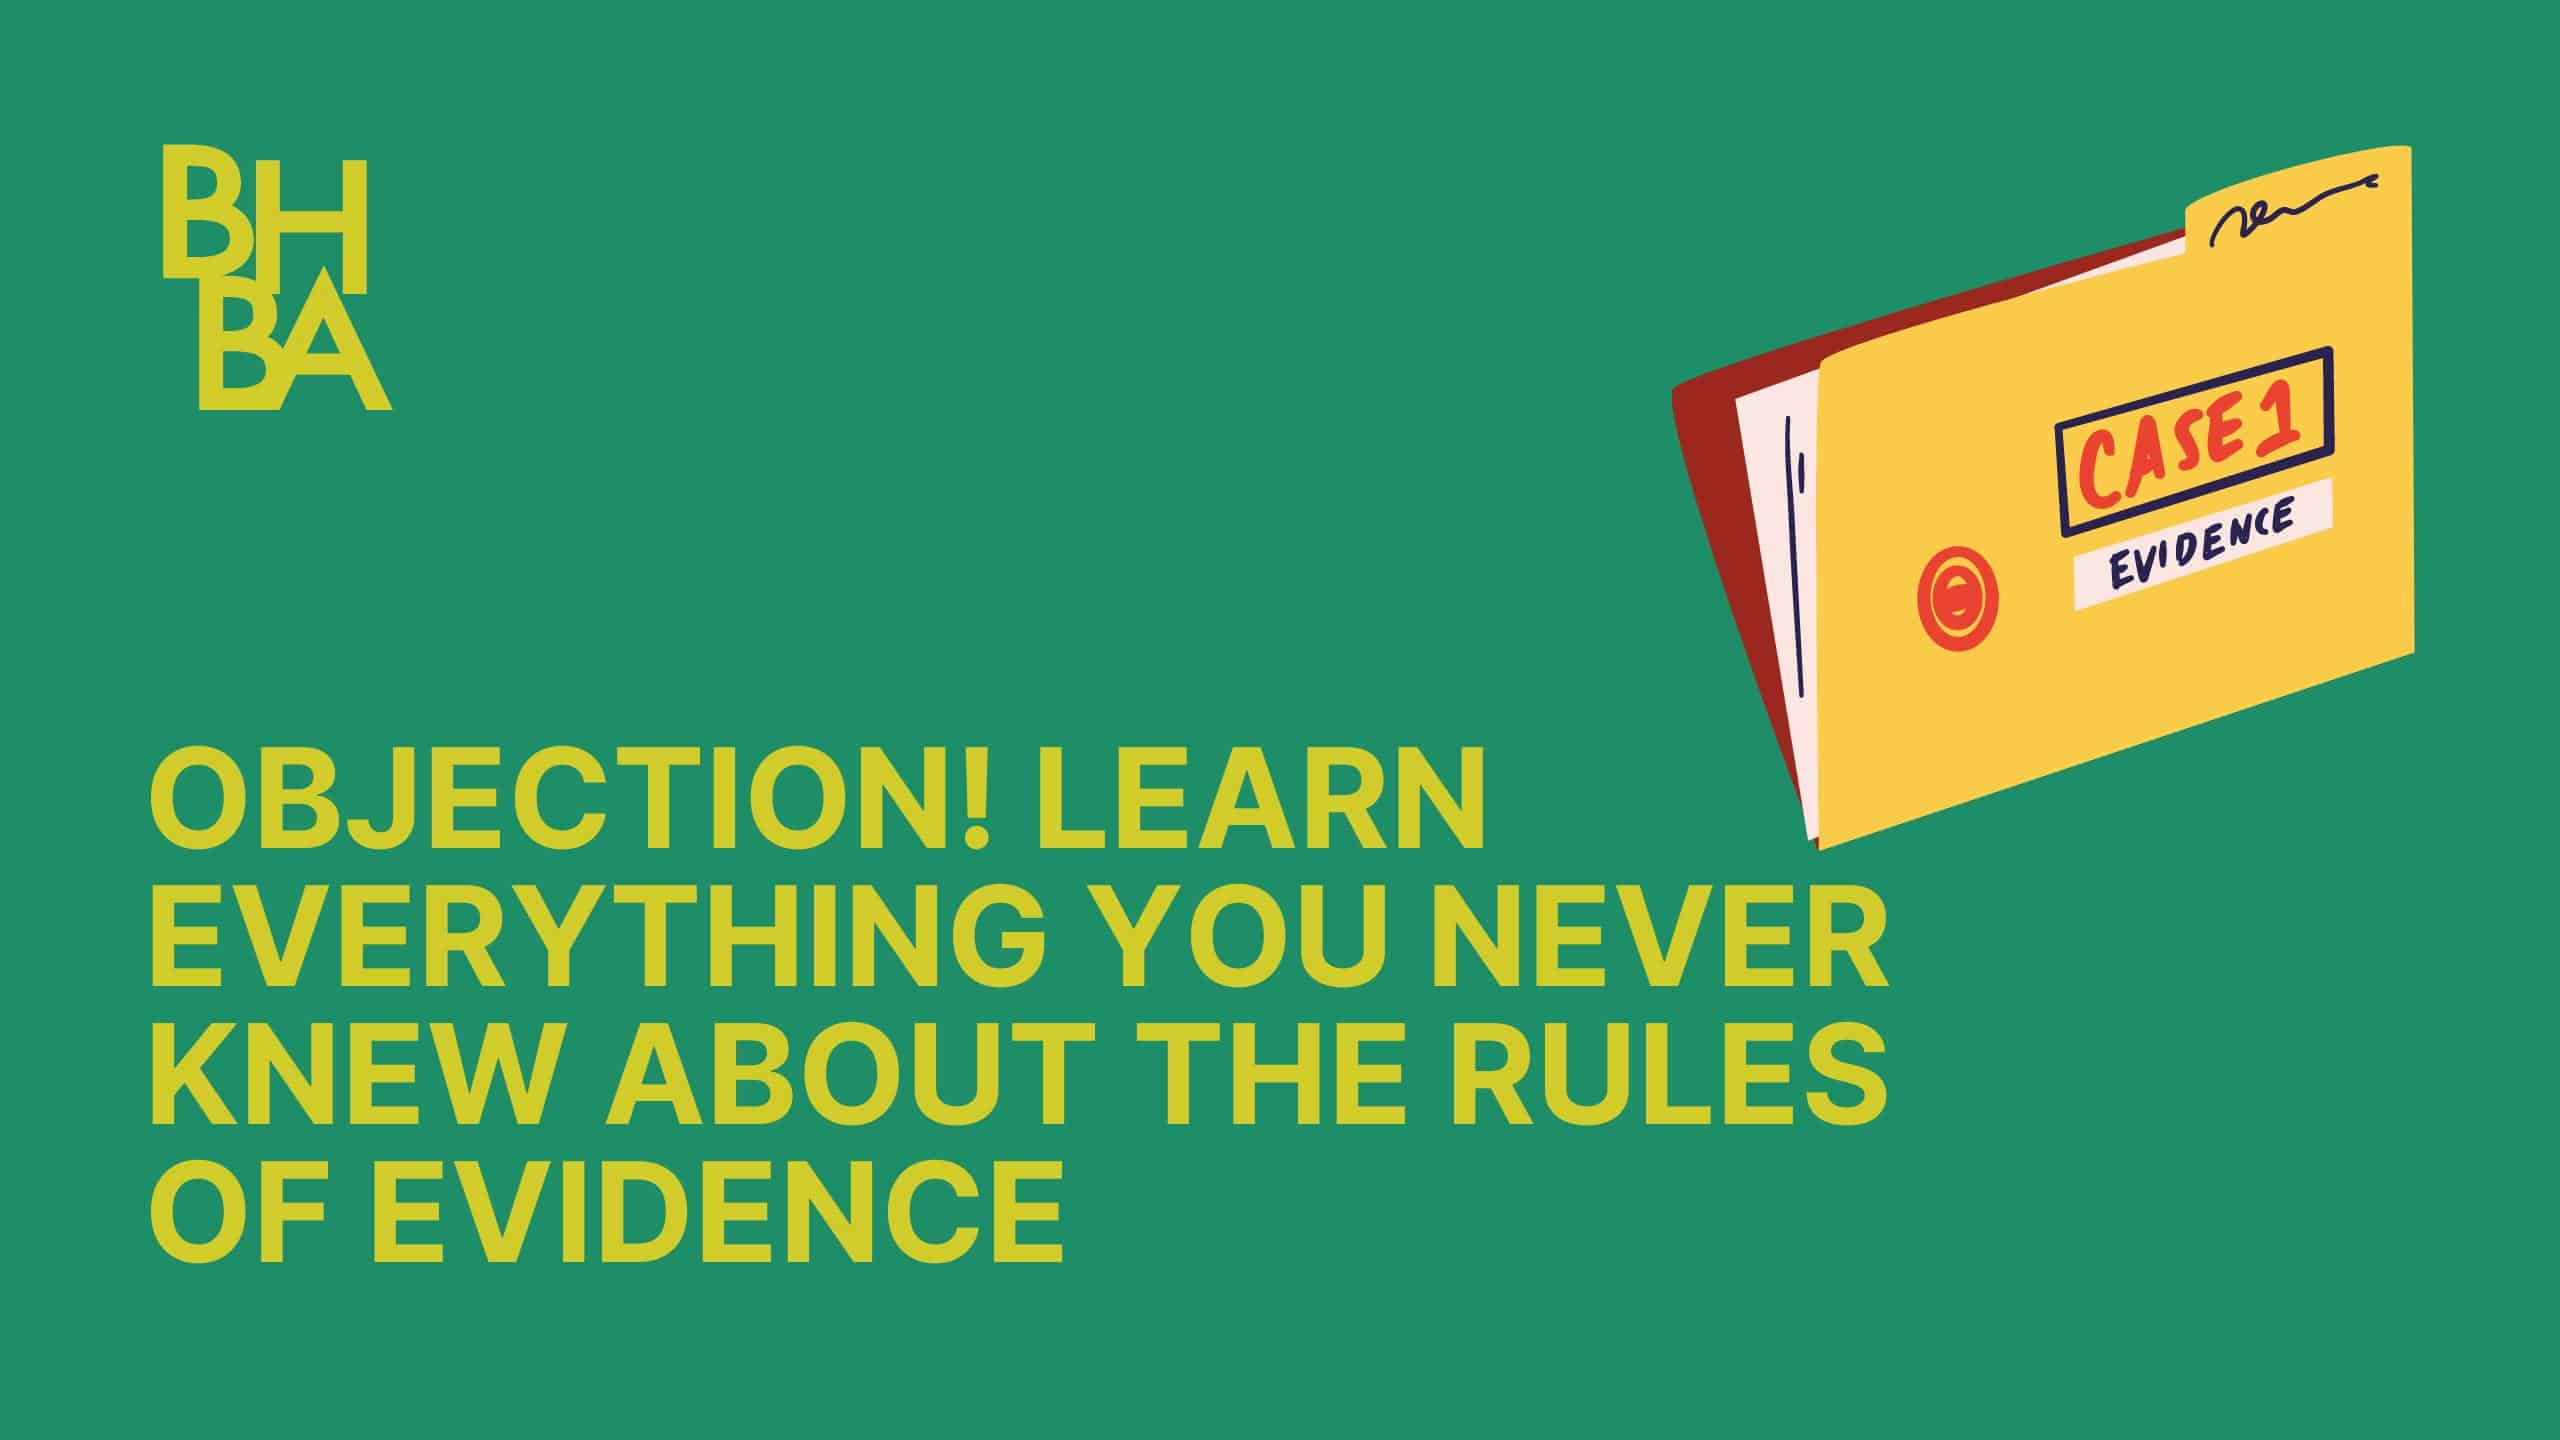 Objection! Learn Everything You Never Knew About the Rules of Evidence